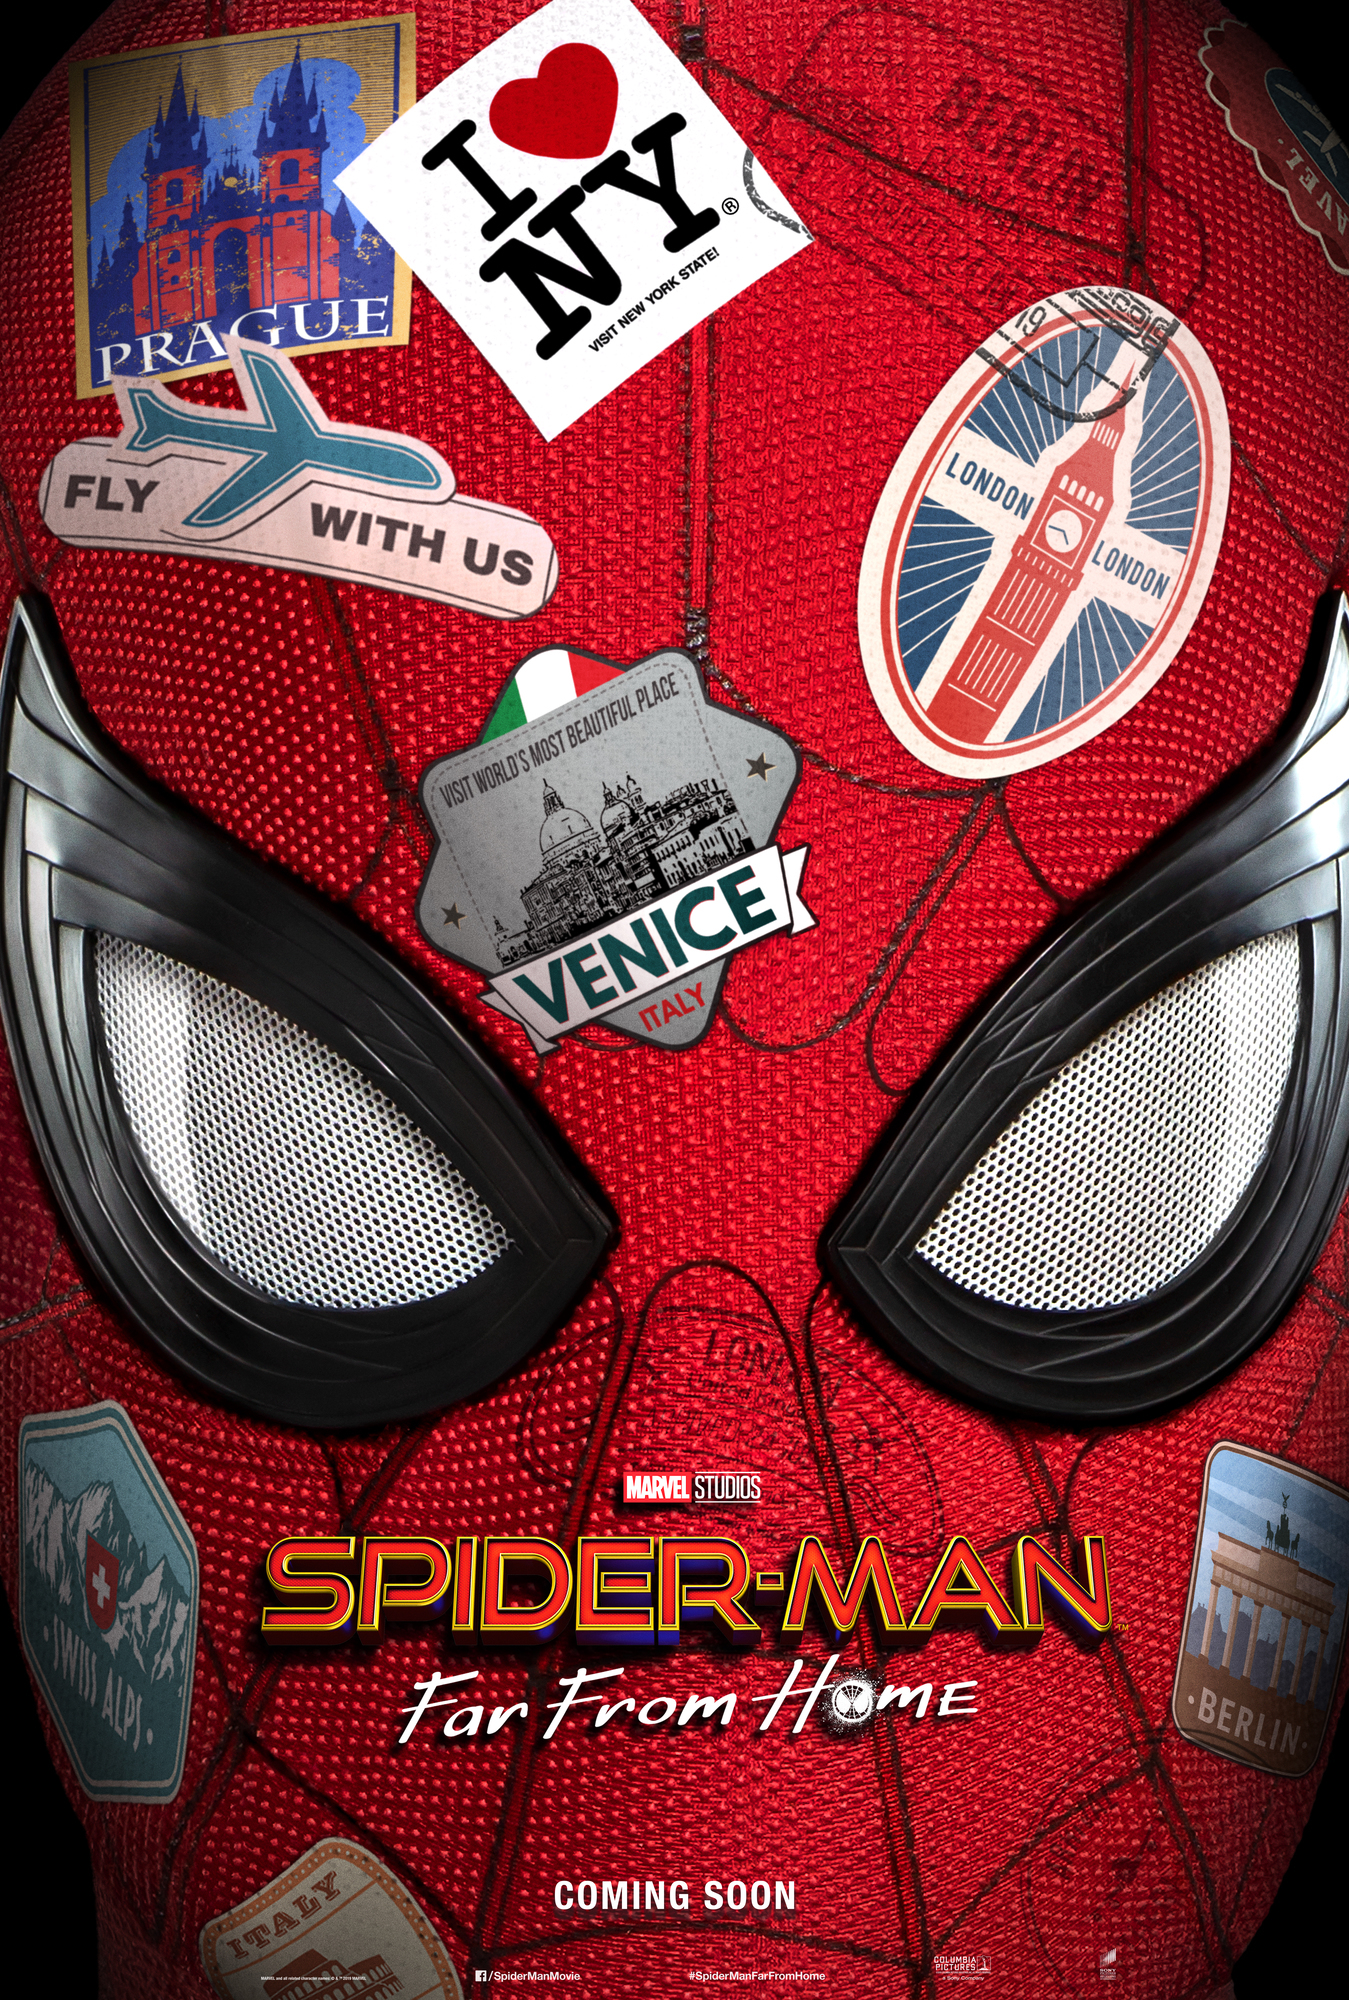 Spider Man Far From Home Movie Poster - HD Wallpaper 